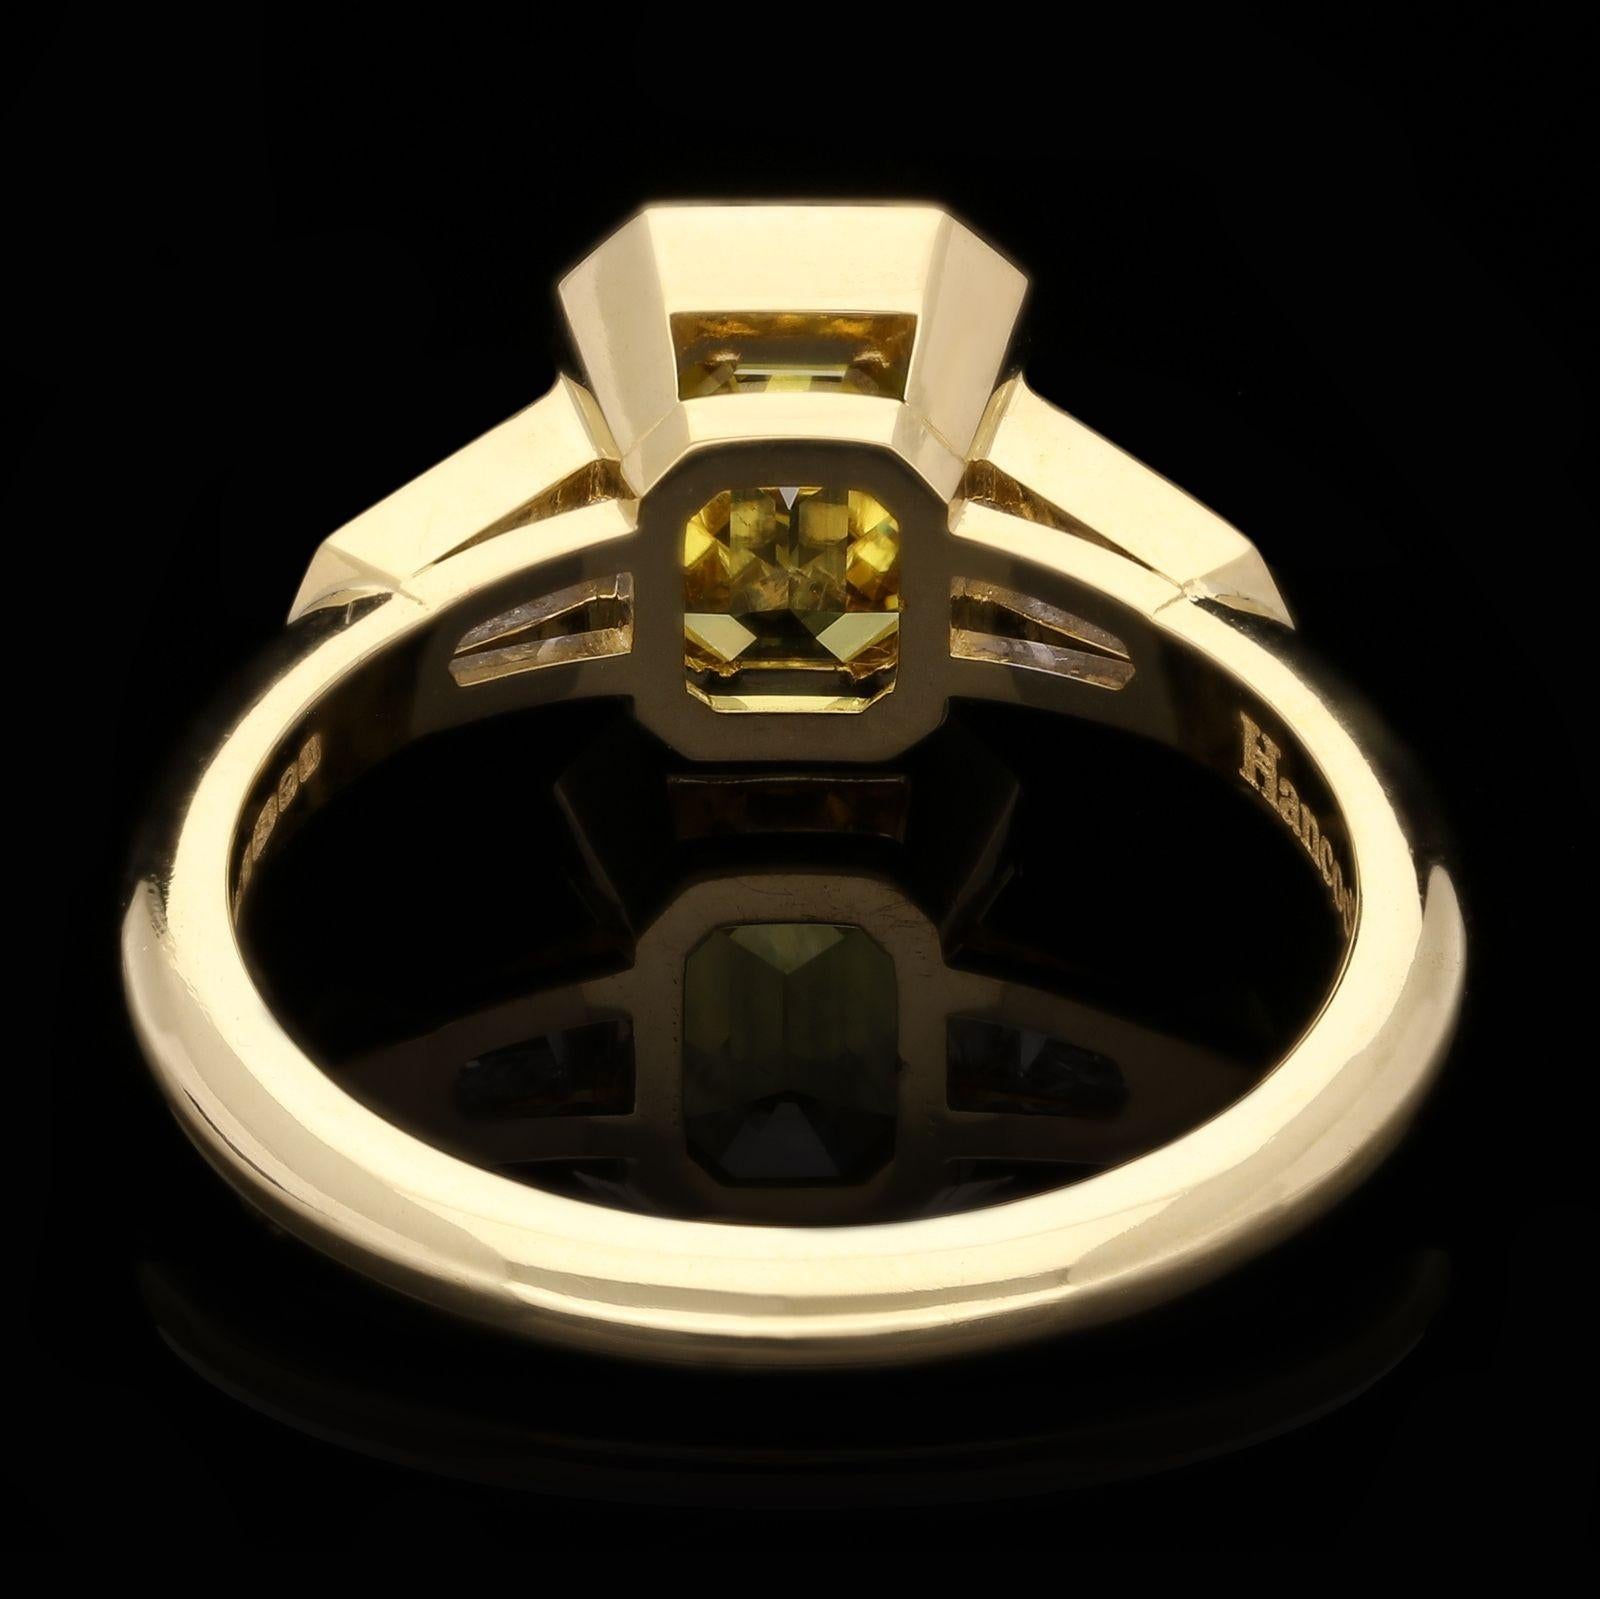 Hancocks 1.52ct Fancy Deep Yellow Diamond Ring with White Diamond Shoulders In New Condition For Sale In London, GB